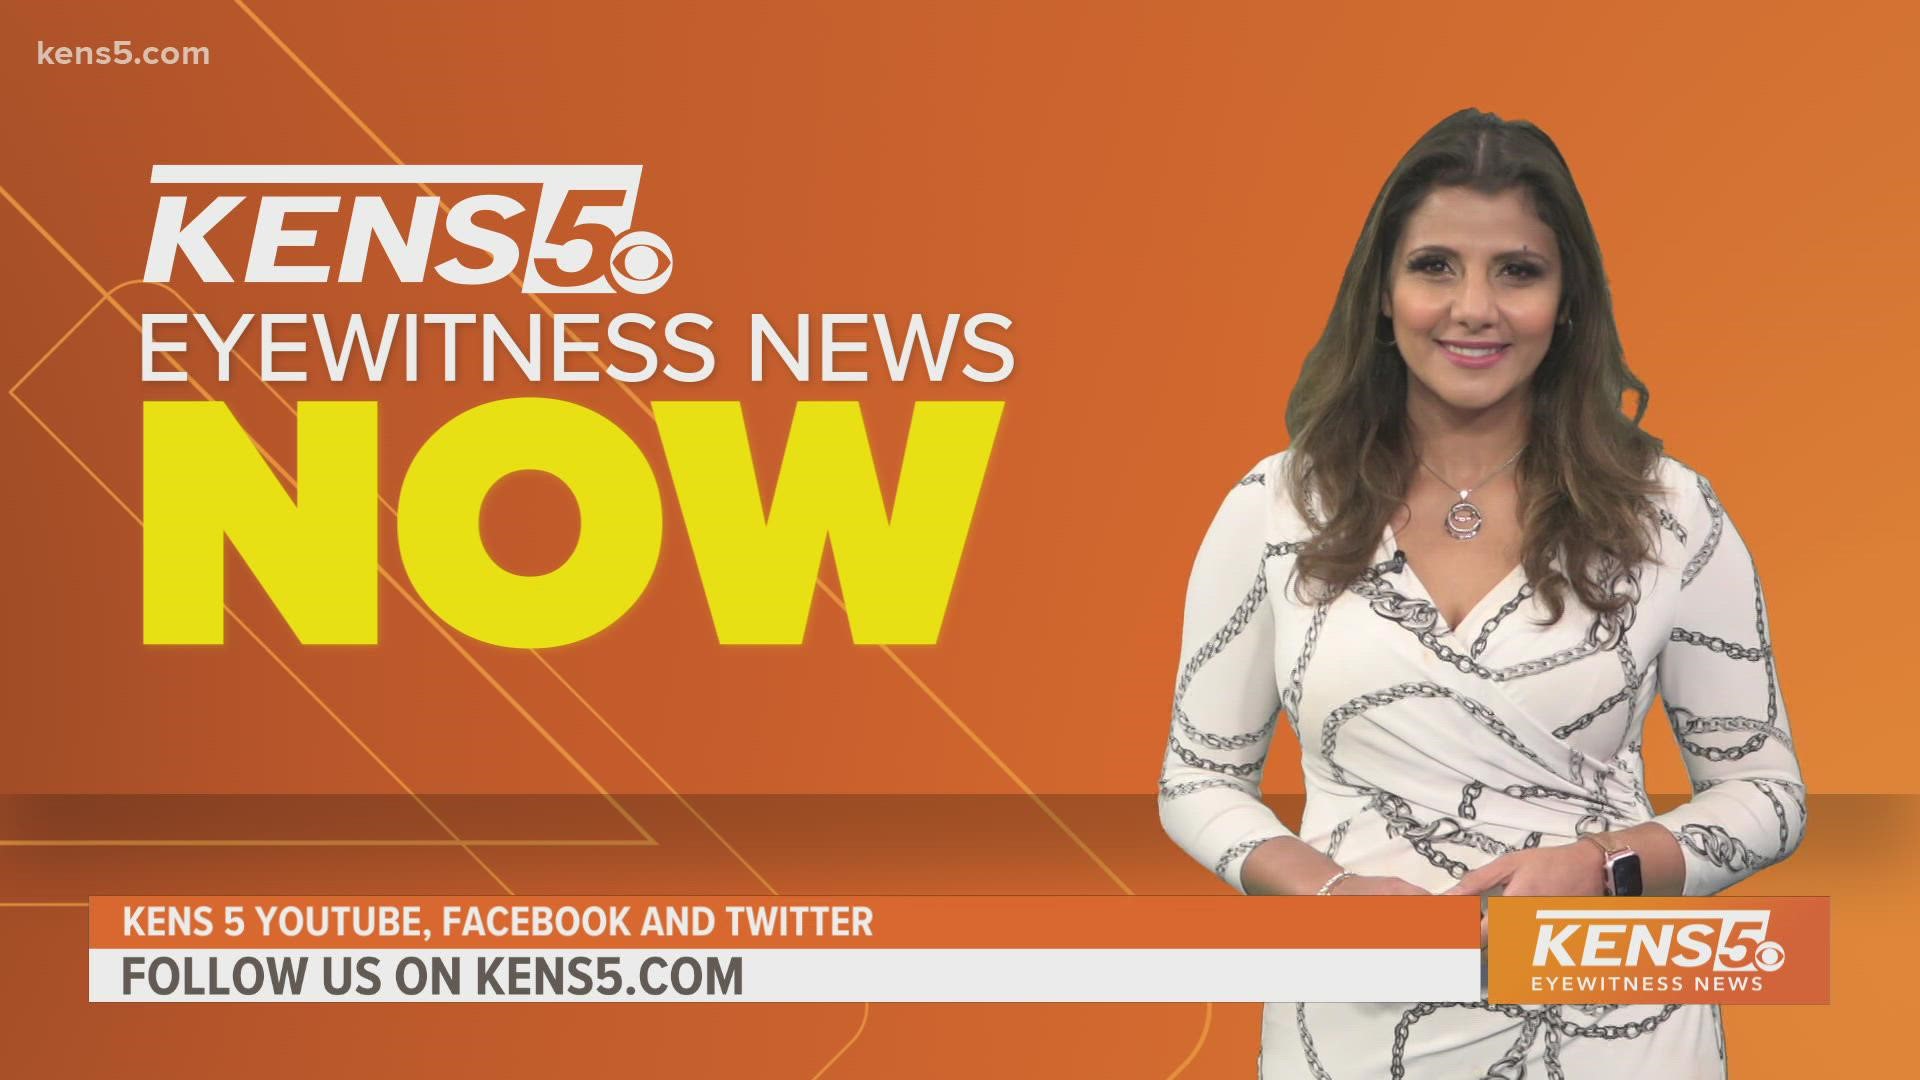 Follow us to get the latest with KENS 5's Sarah Forgany every weekday.